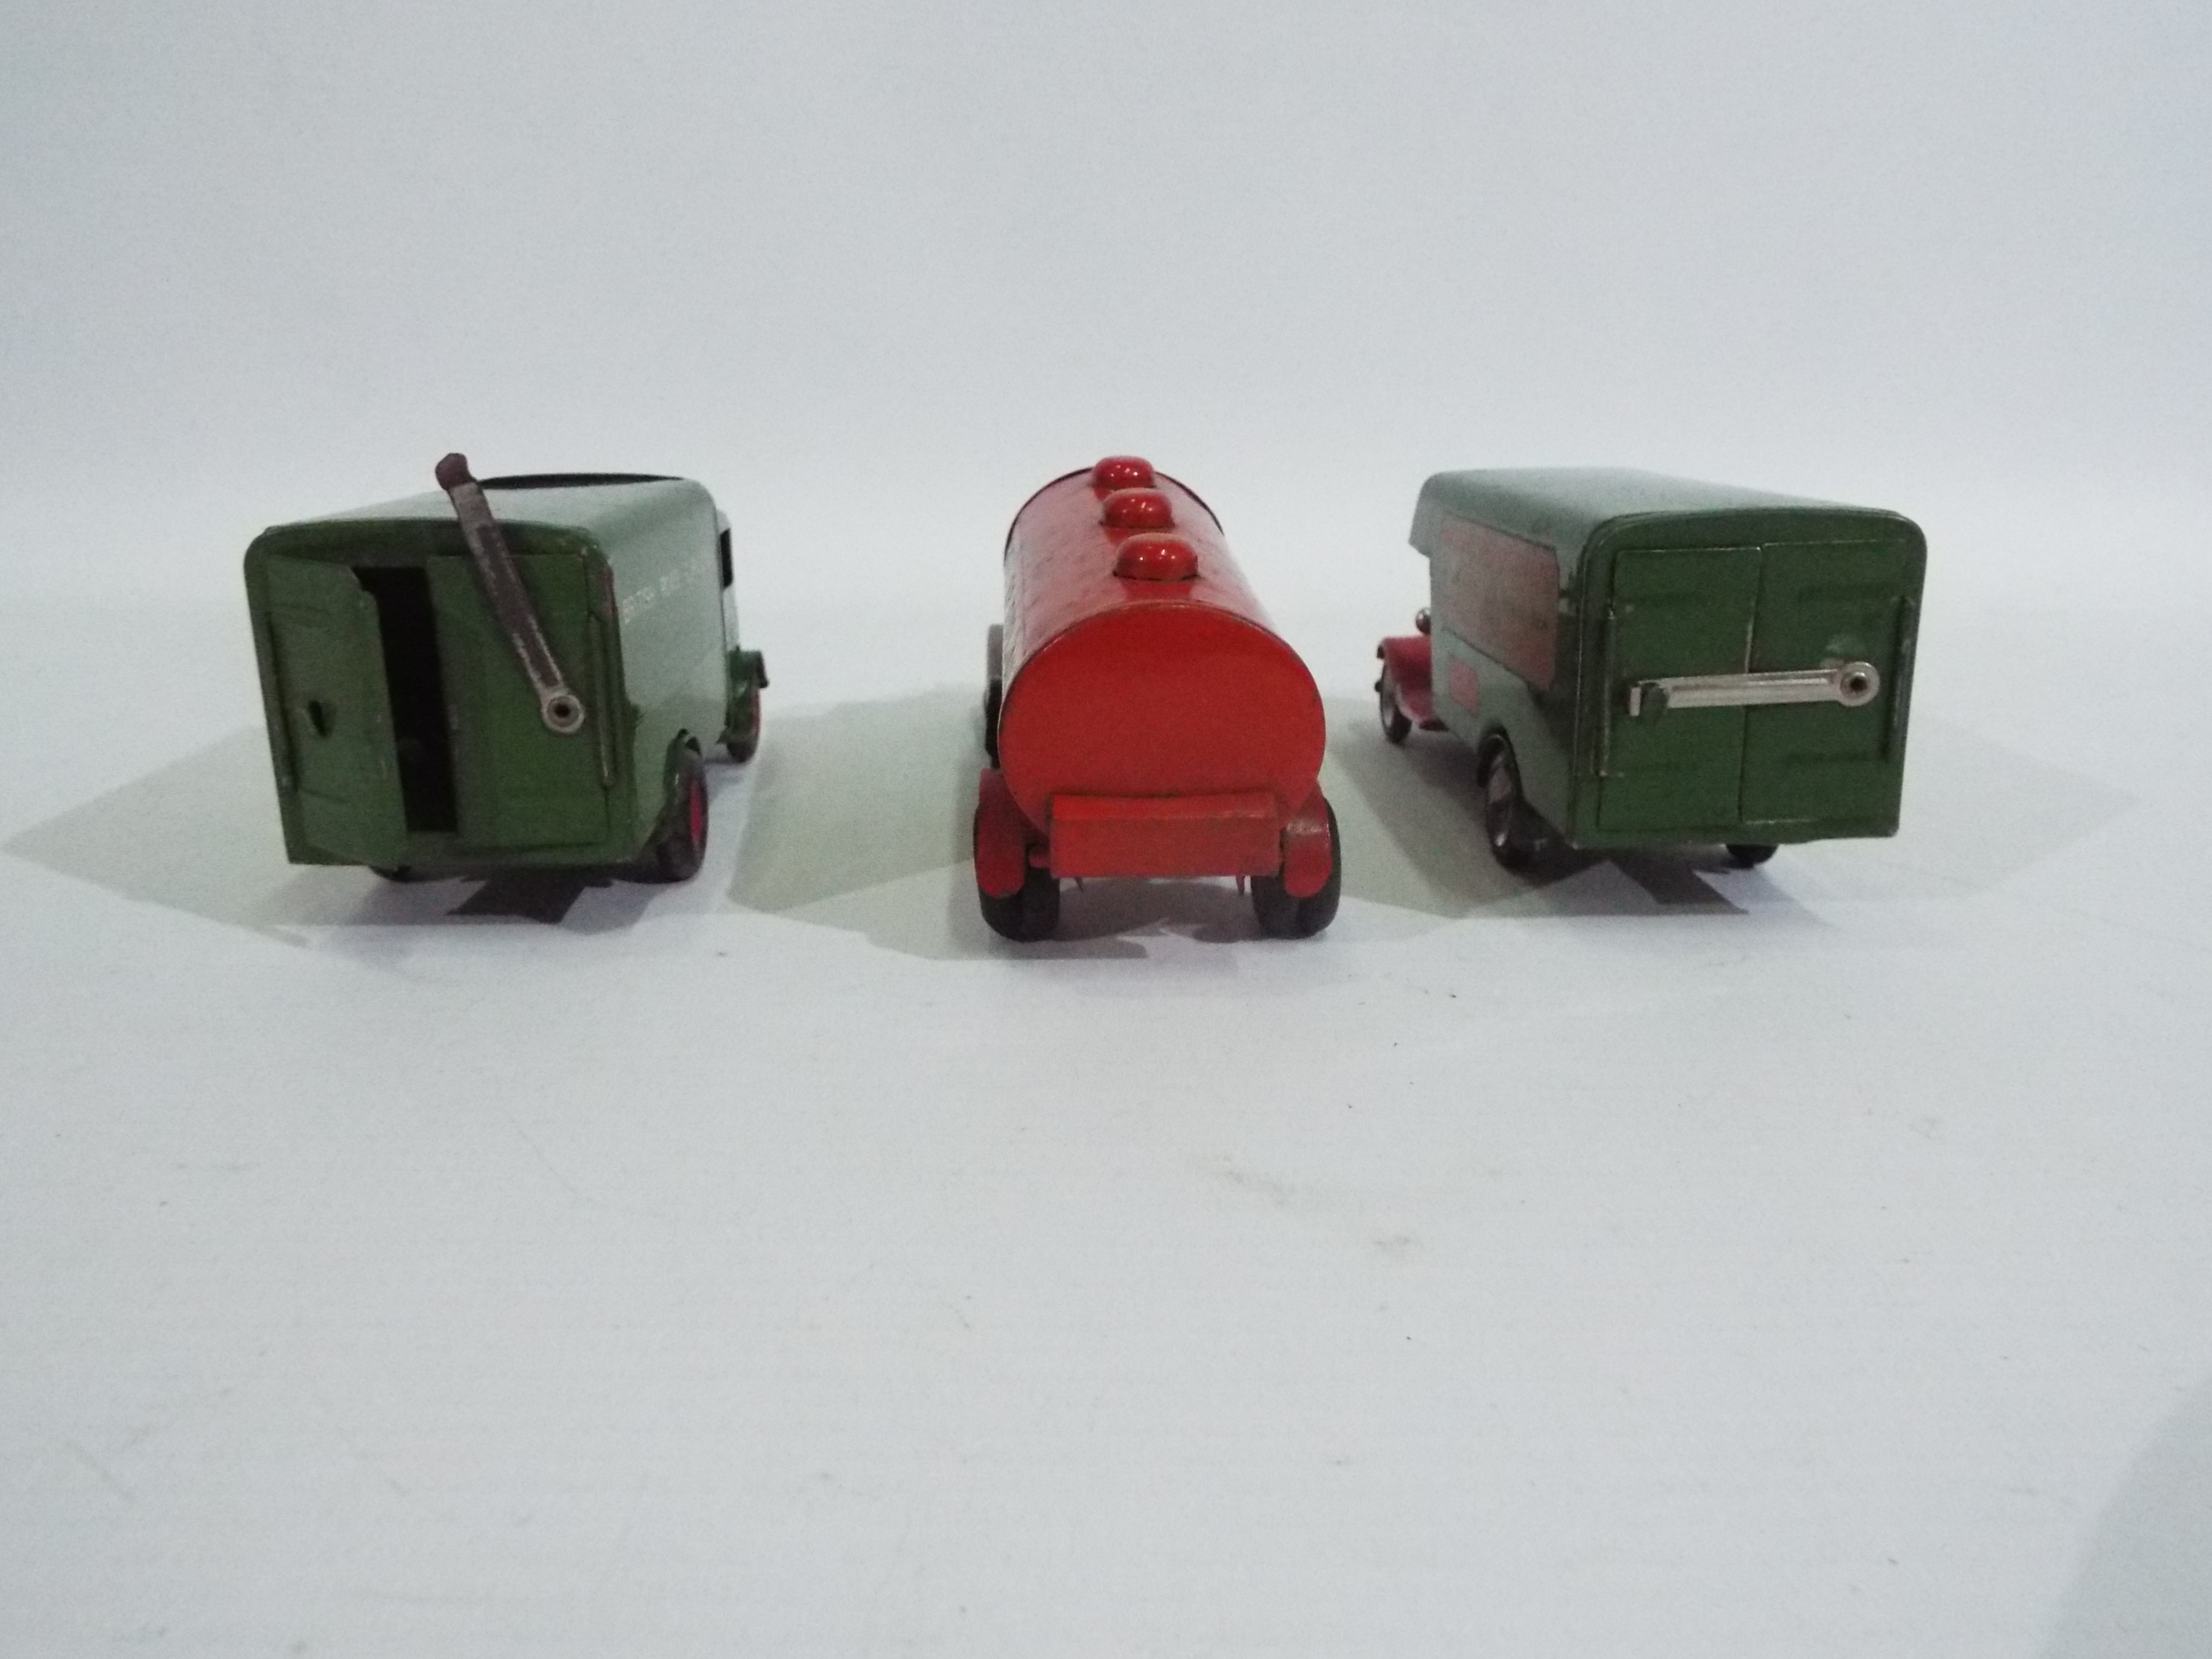 Tri-ang - Minic - 3 x clockwork pressed metal vehicles, an Articulated Shell Tanker, - Image 4 of 5